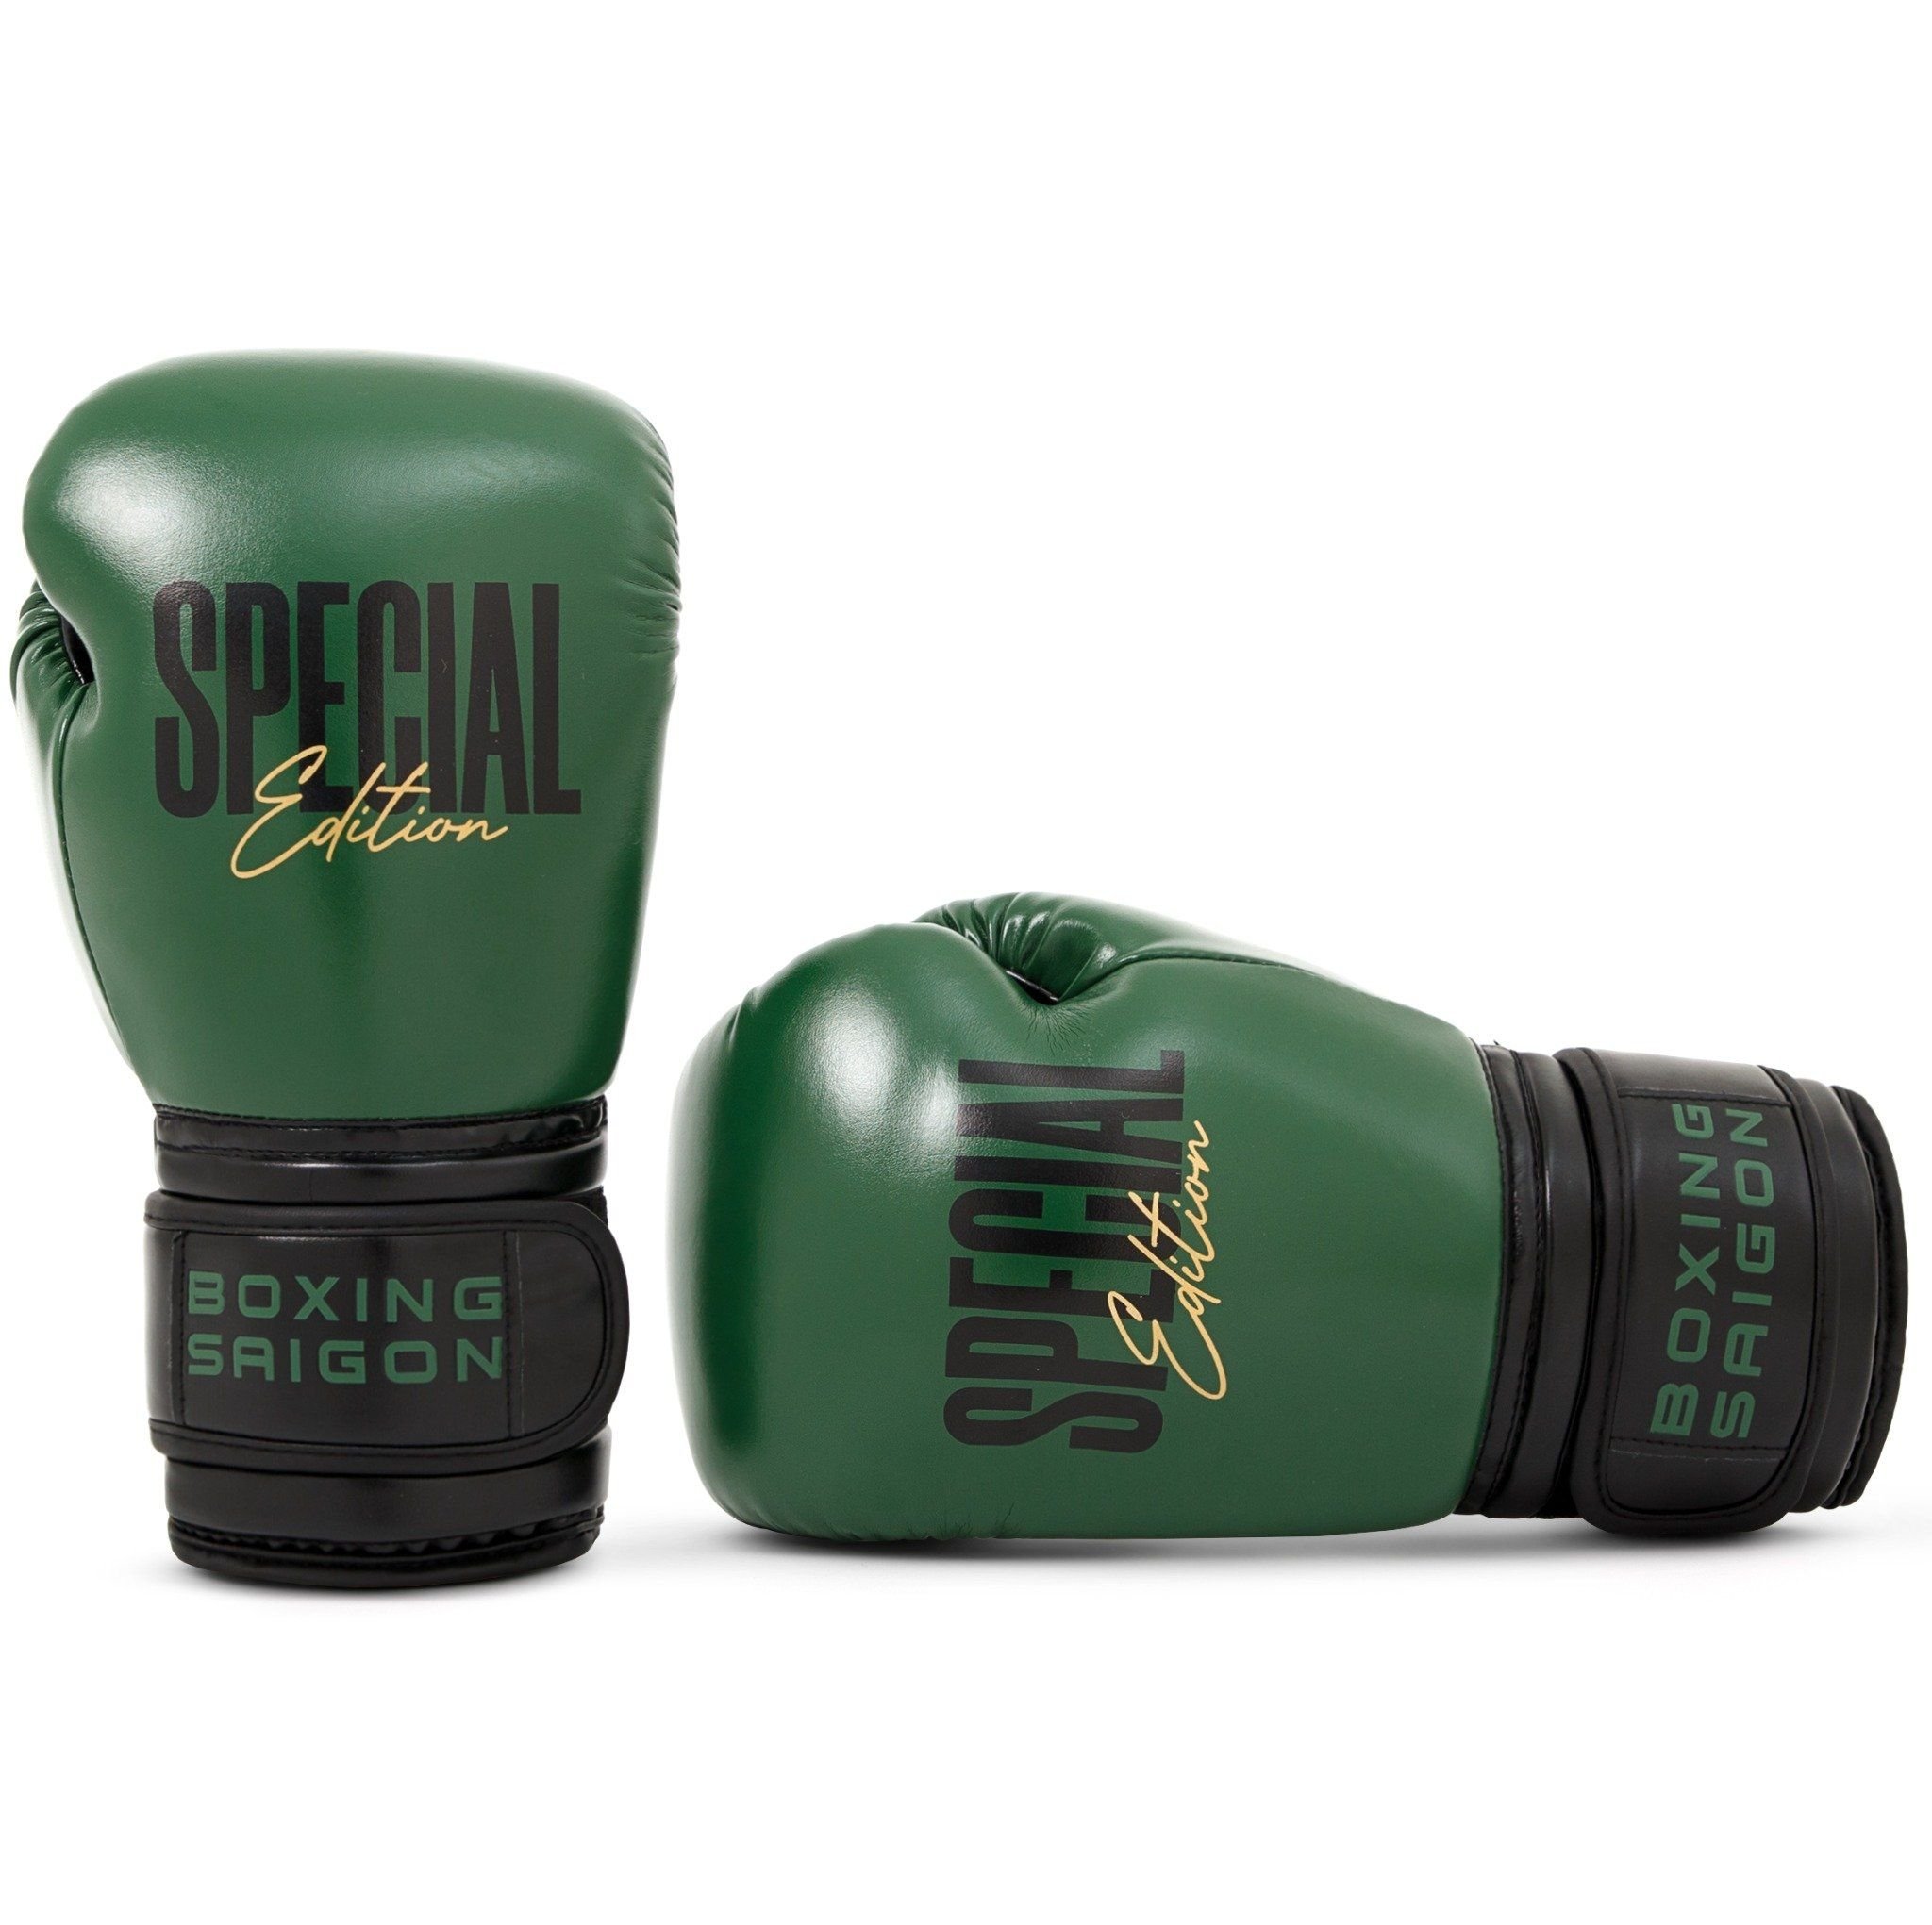 Găng Tay Boxing Saigon Special Edition Gloves - Forest